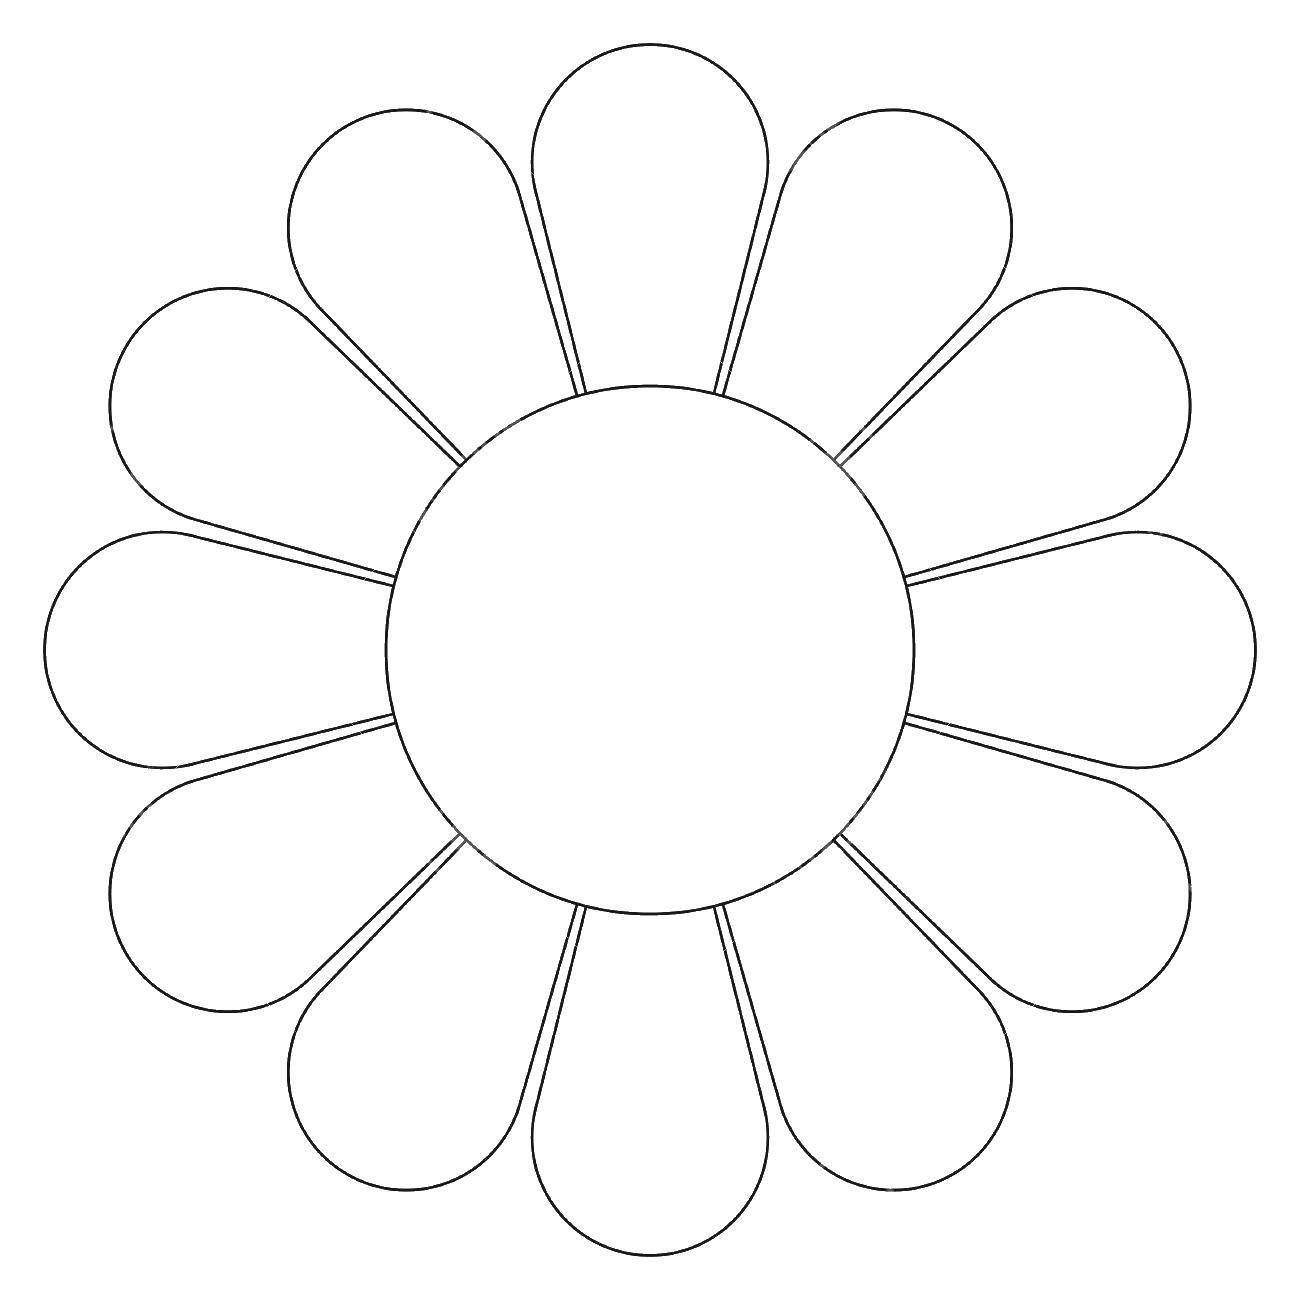 Coloring Daisy. Category The contours of flowers. Tags:  chamomile.